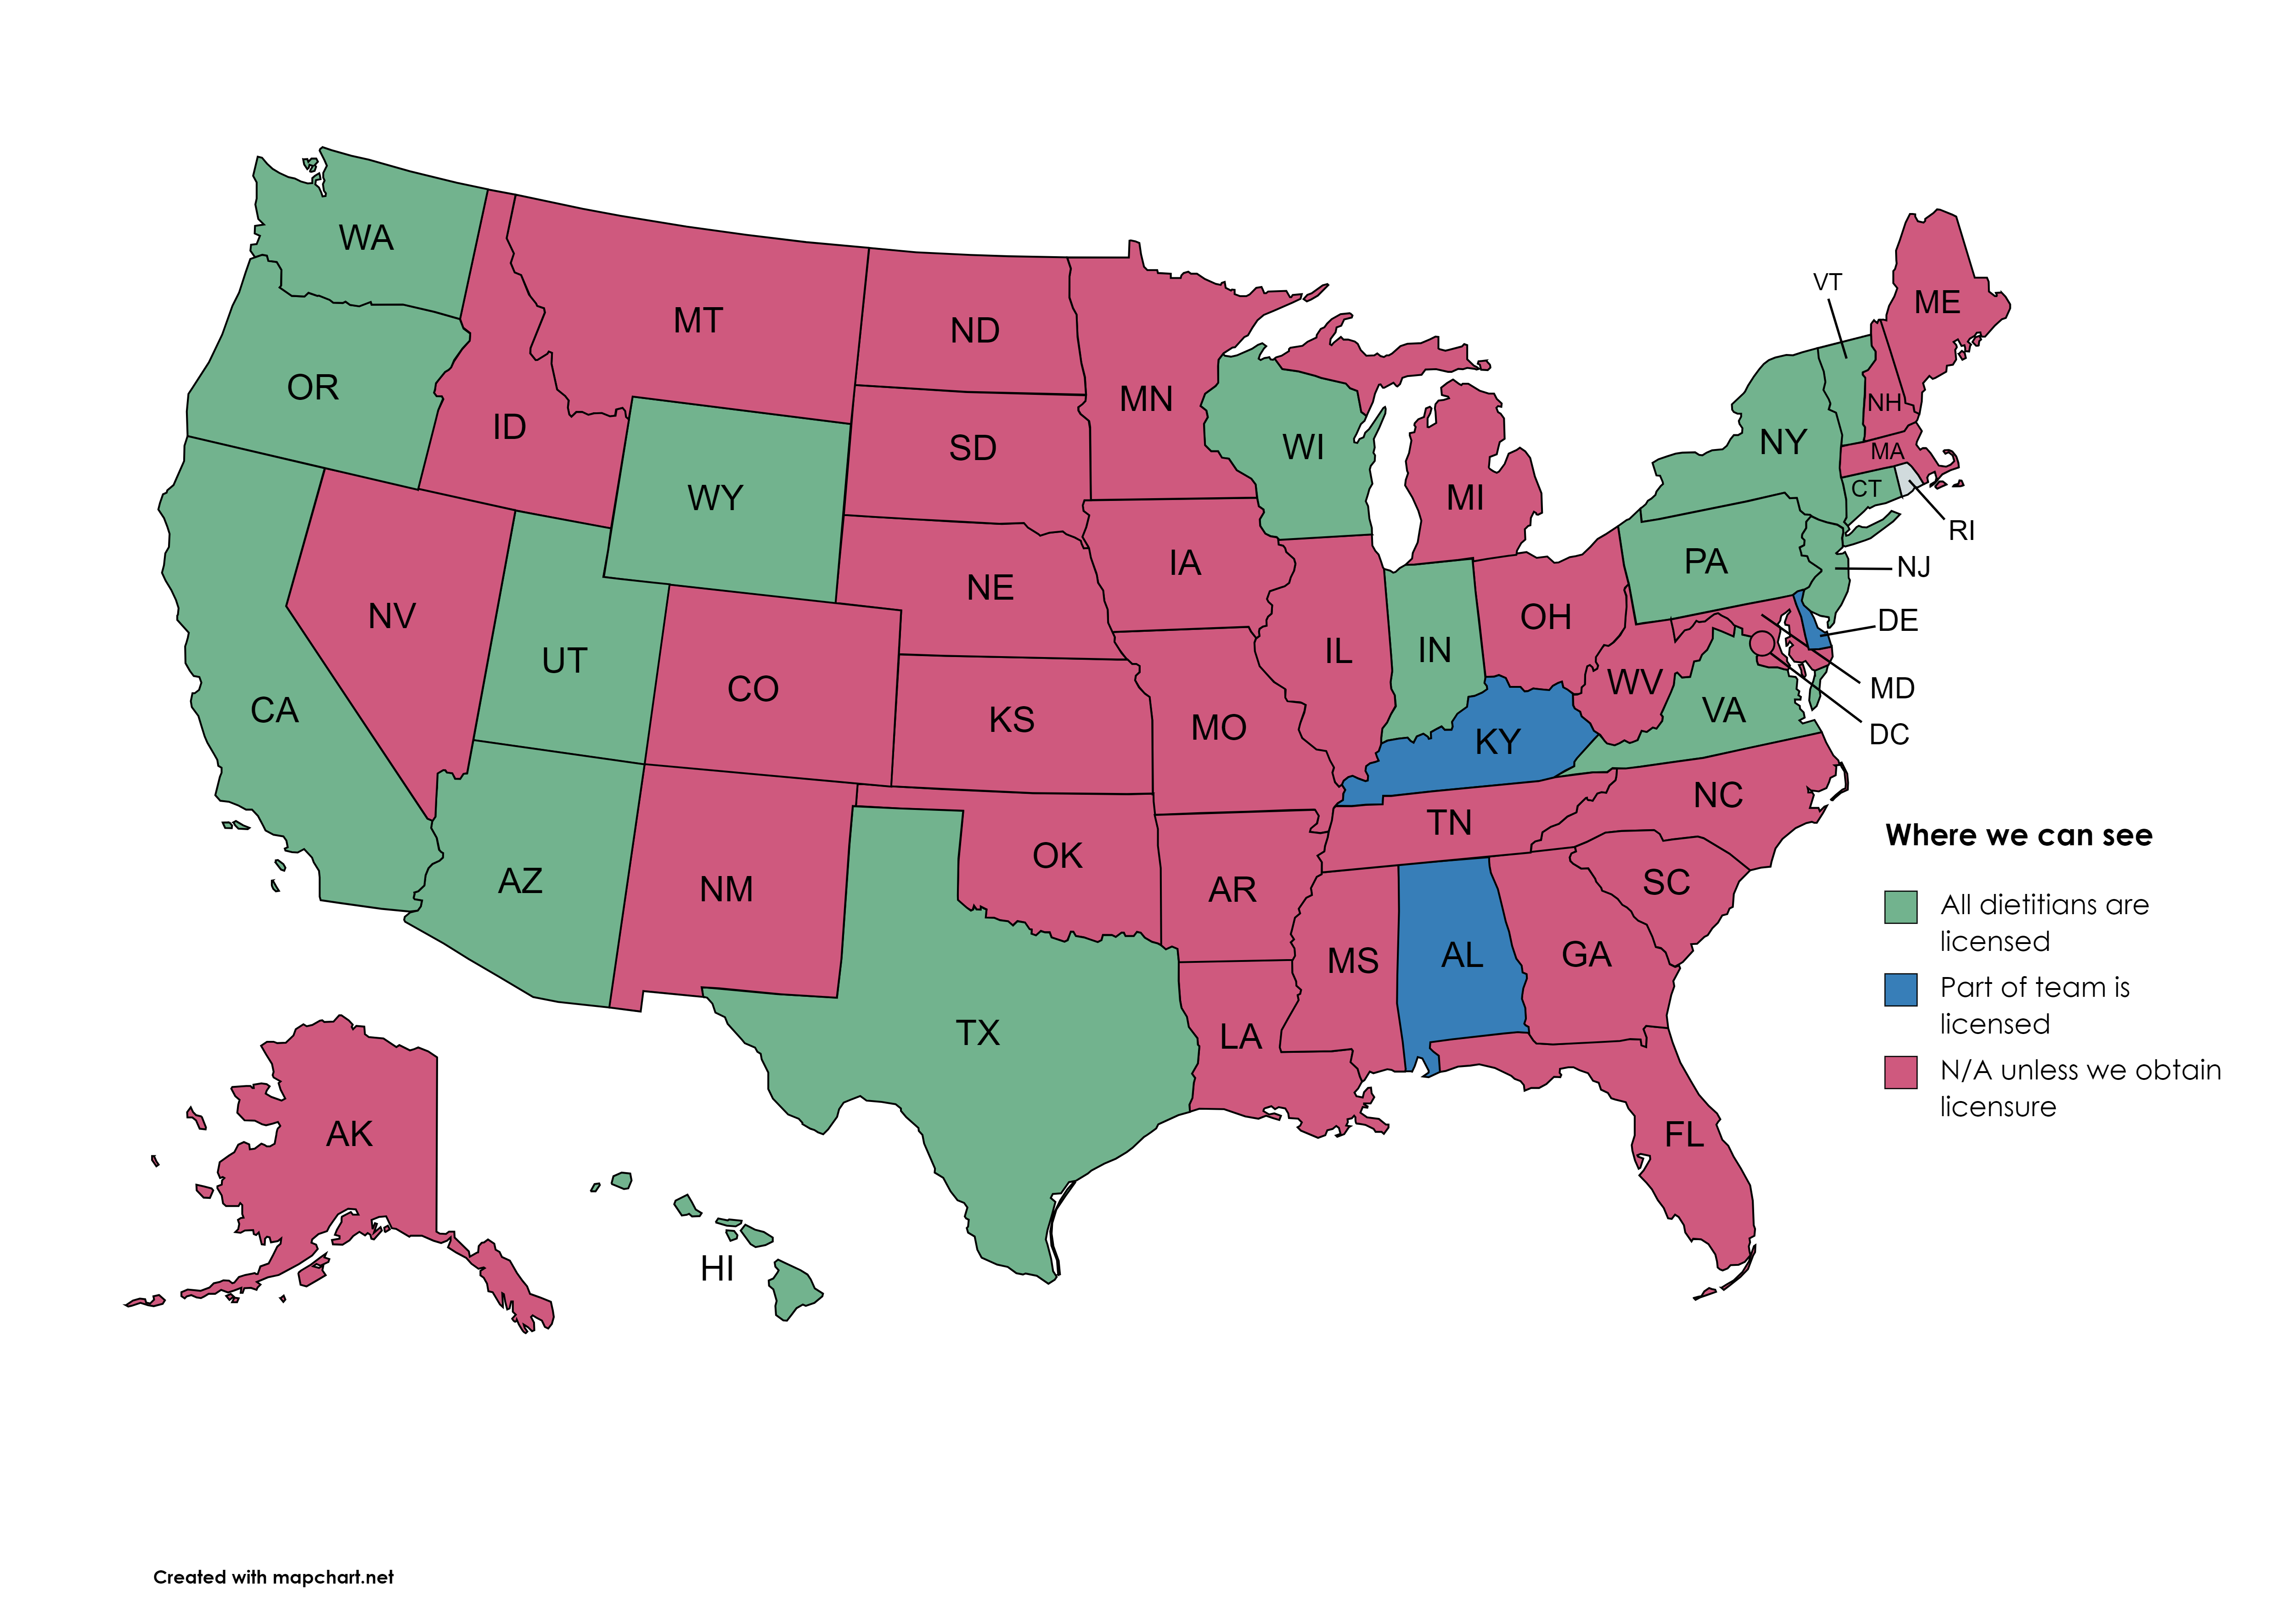 Map of states that Vita Nutrition Services can see online